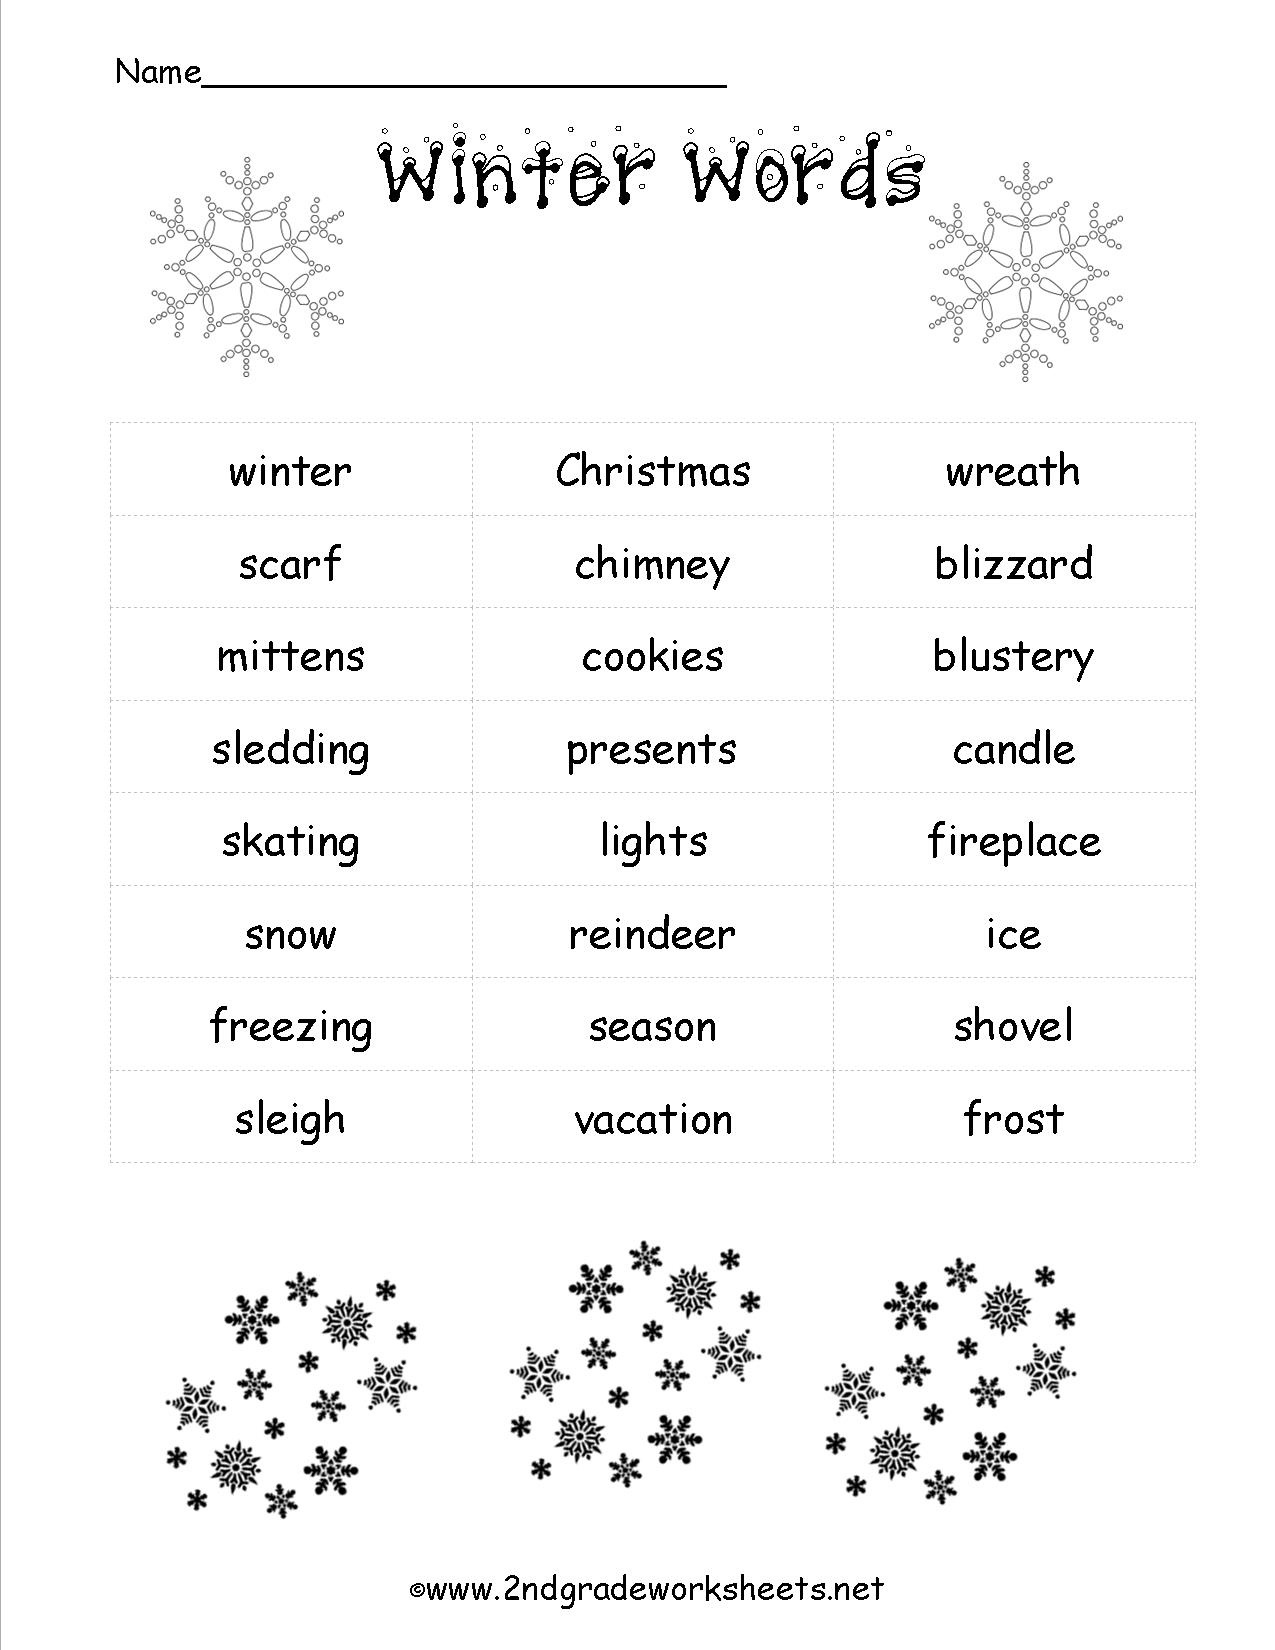 Christmas Worksheets And Printouts - Free Printable Christmas Worksheets For Kids